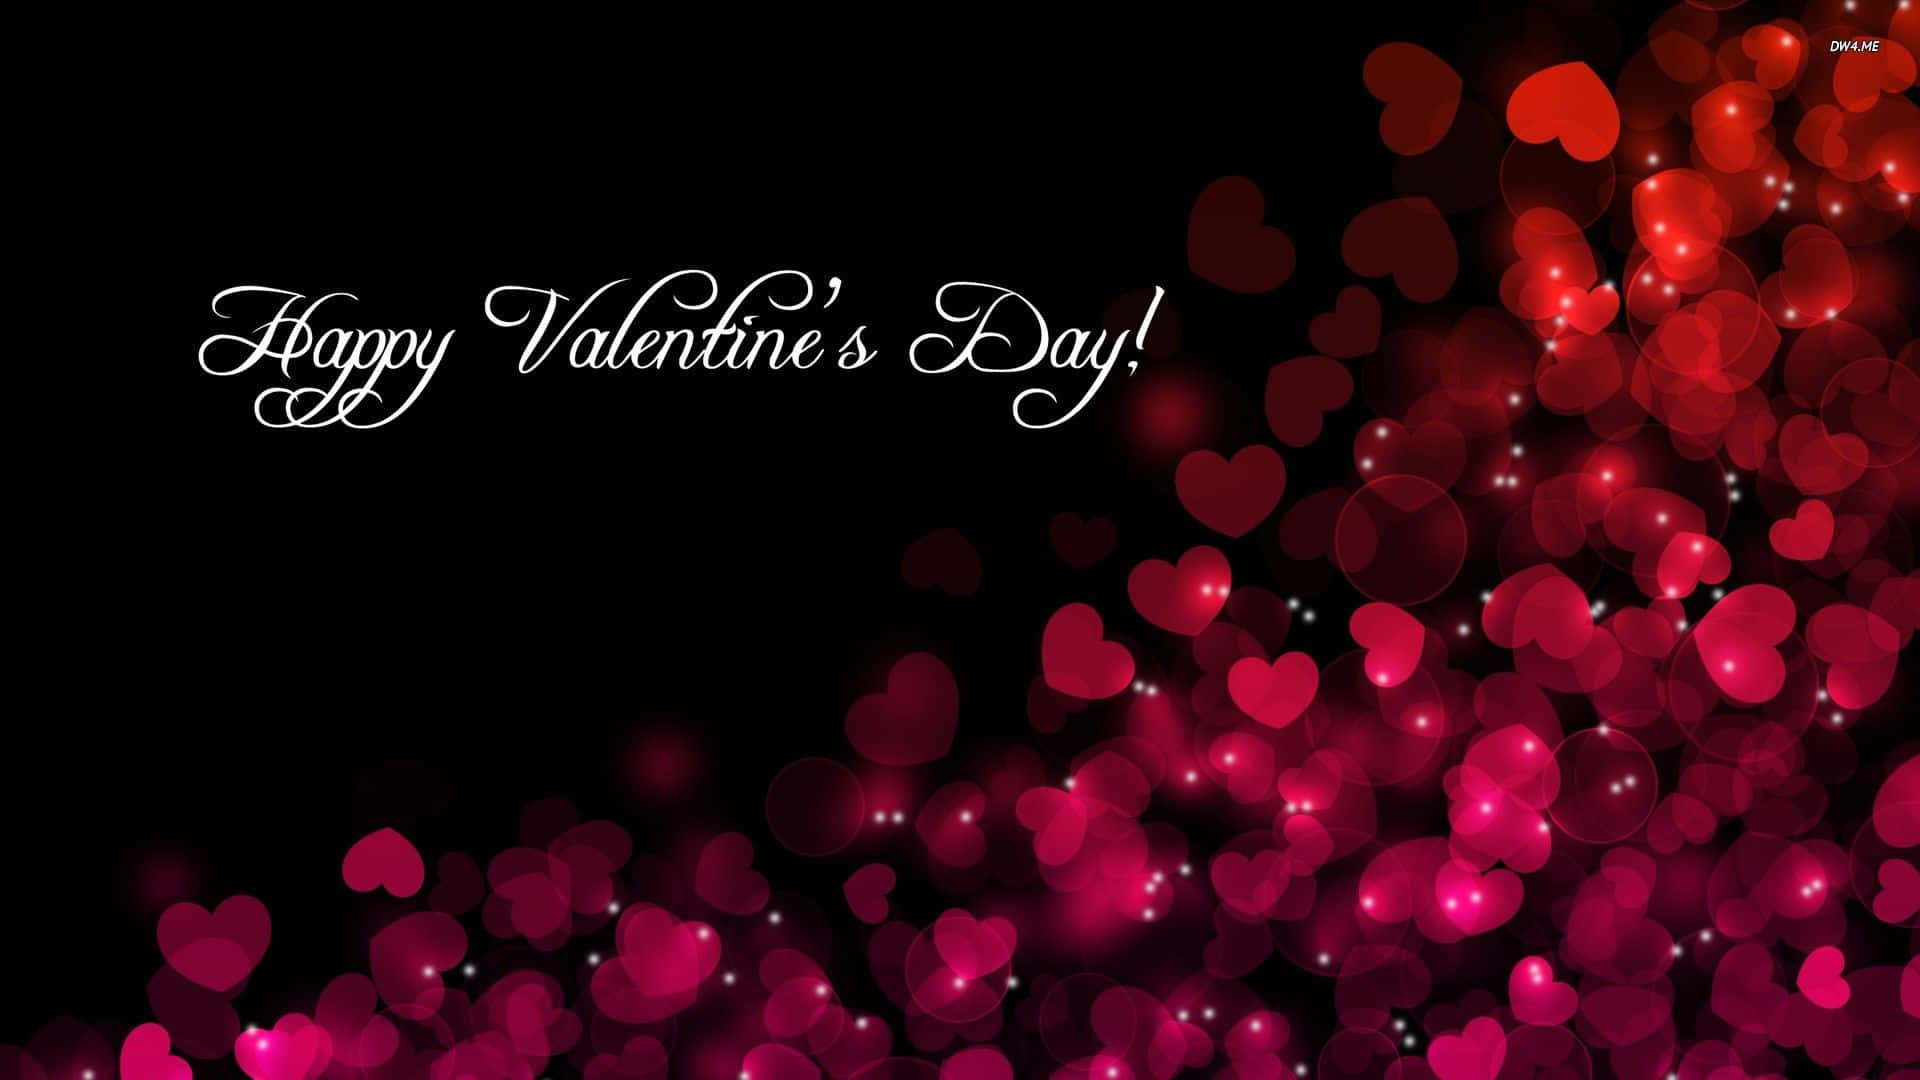 Spread the love this Valentines Day. Wallpaper